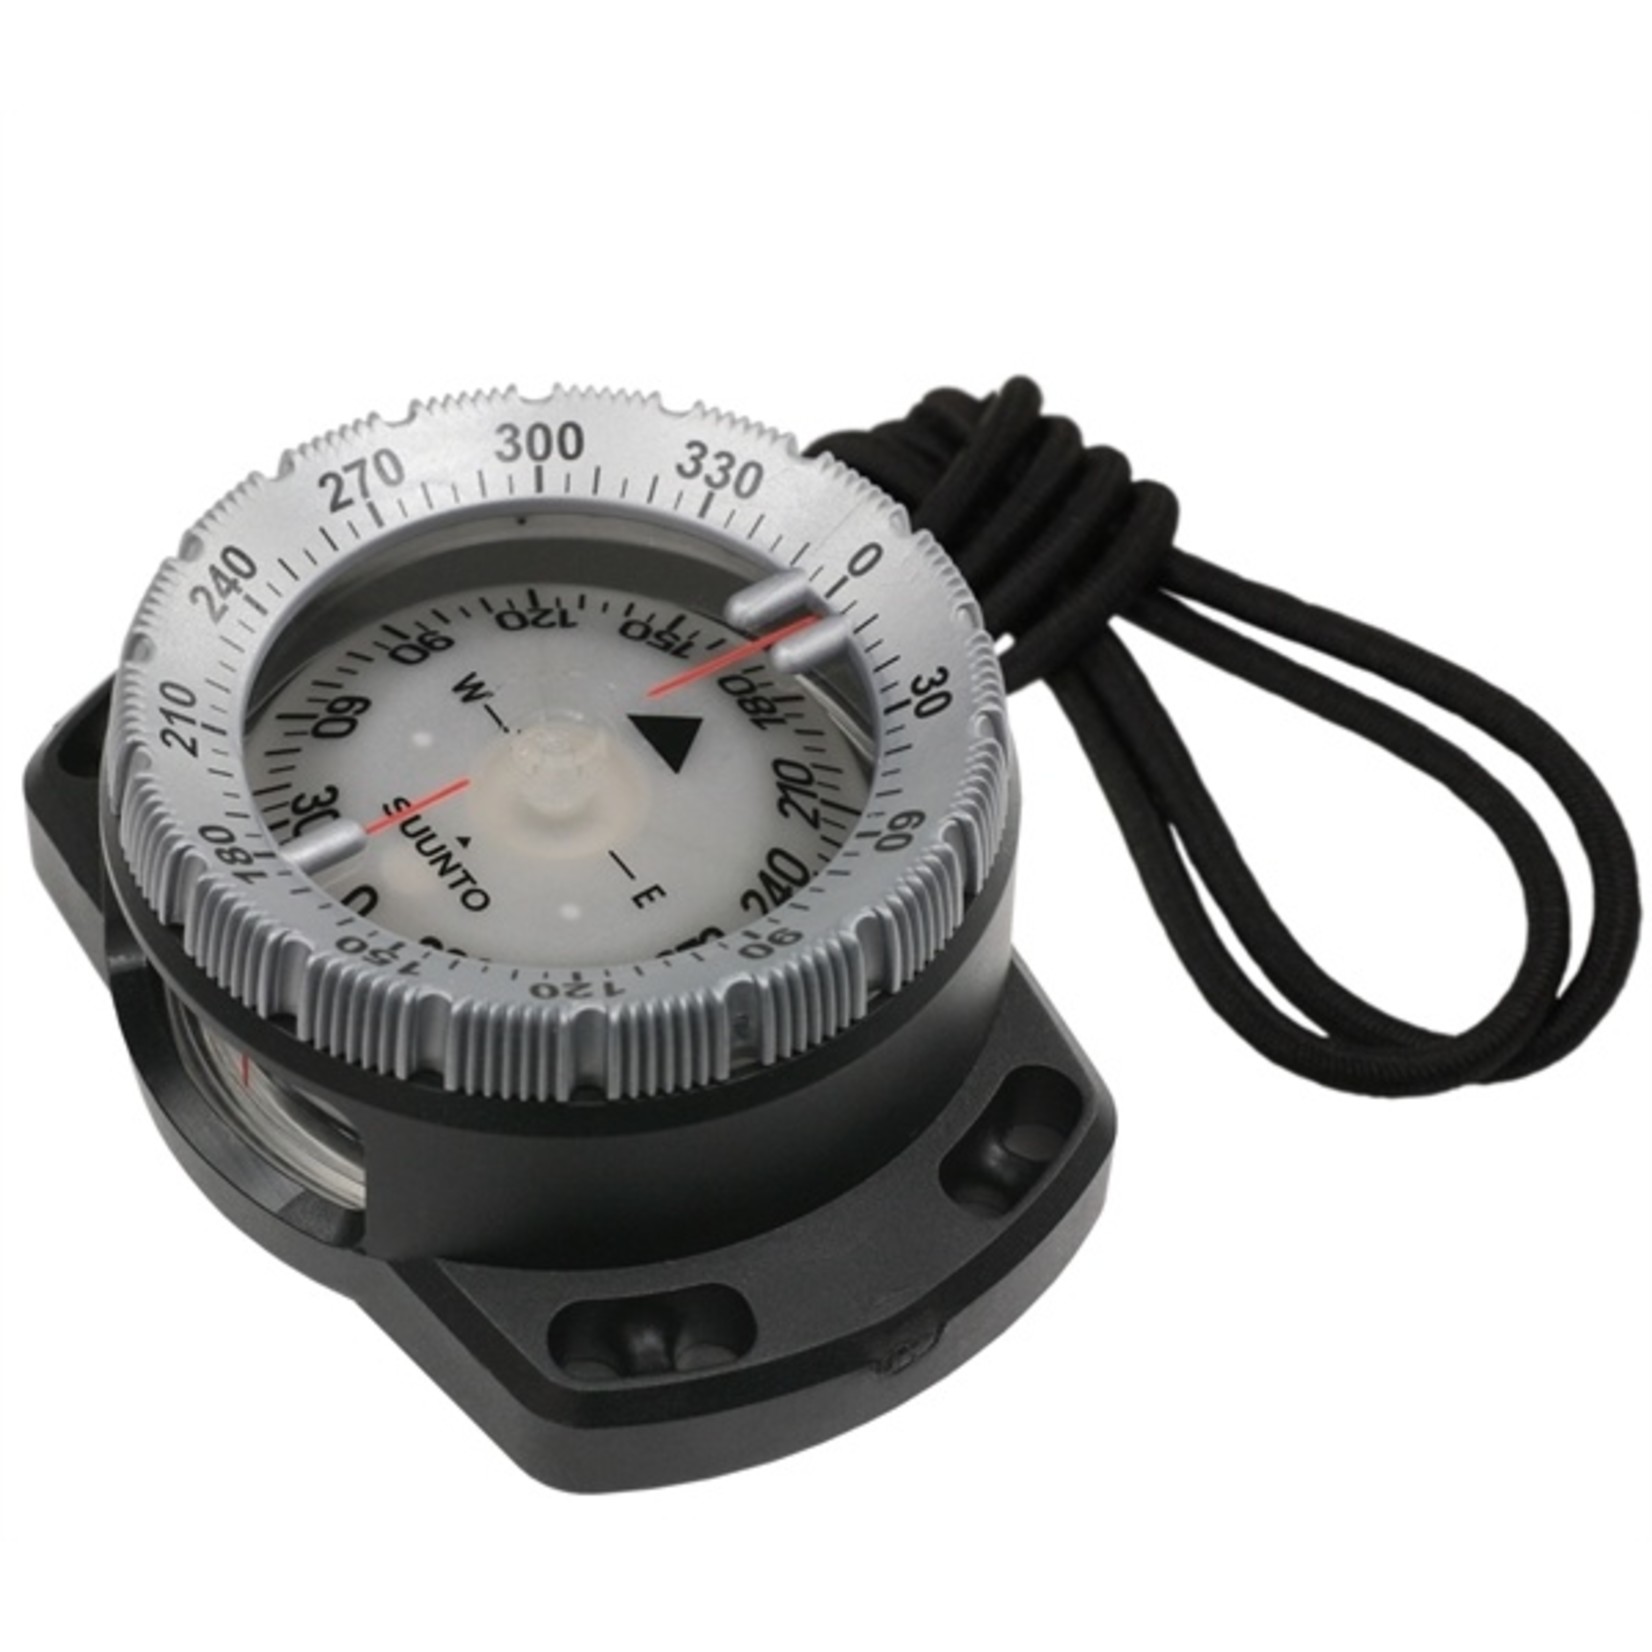 Suunto Boot Bungee SK-8 Diving Compass NH